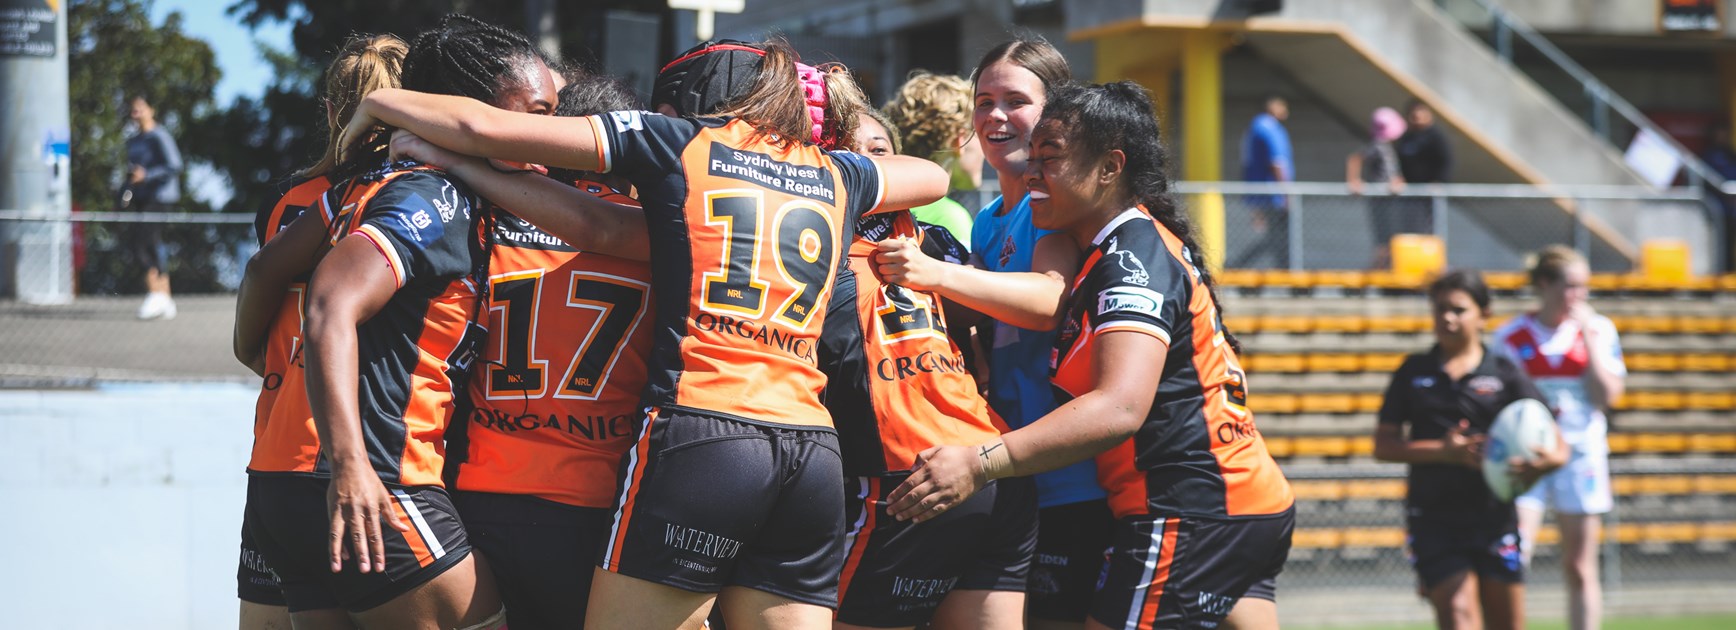 Wests Tigers set for Tarsha Gale Cup finals